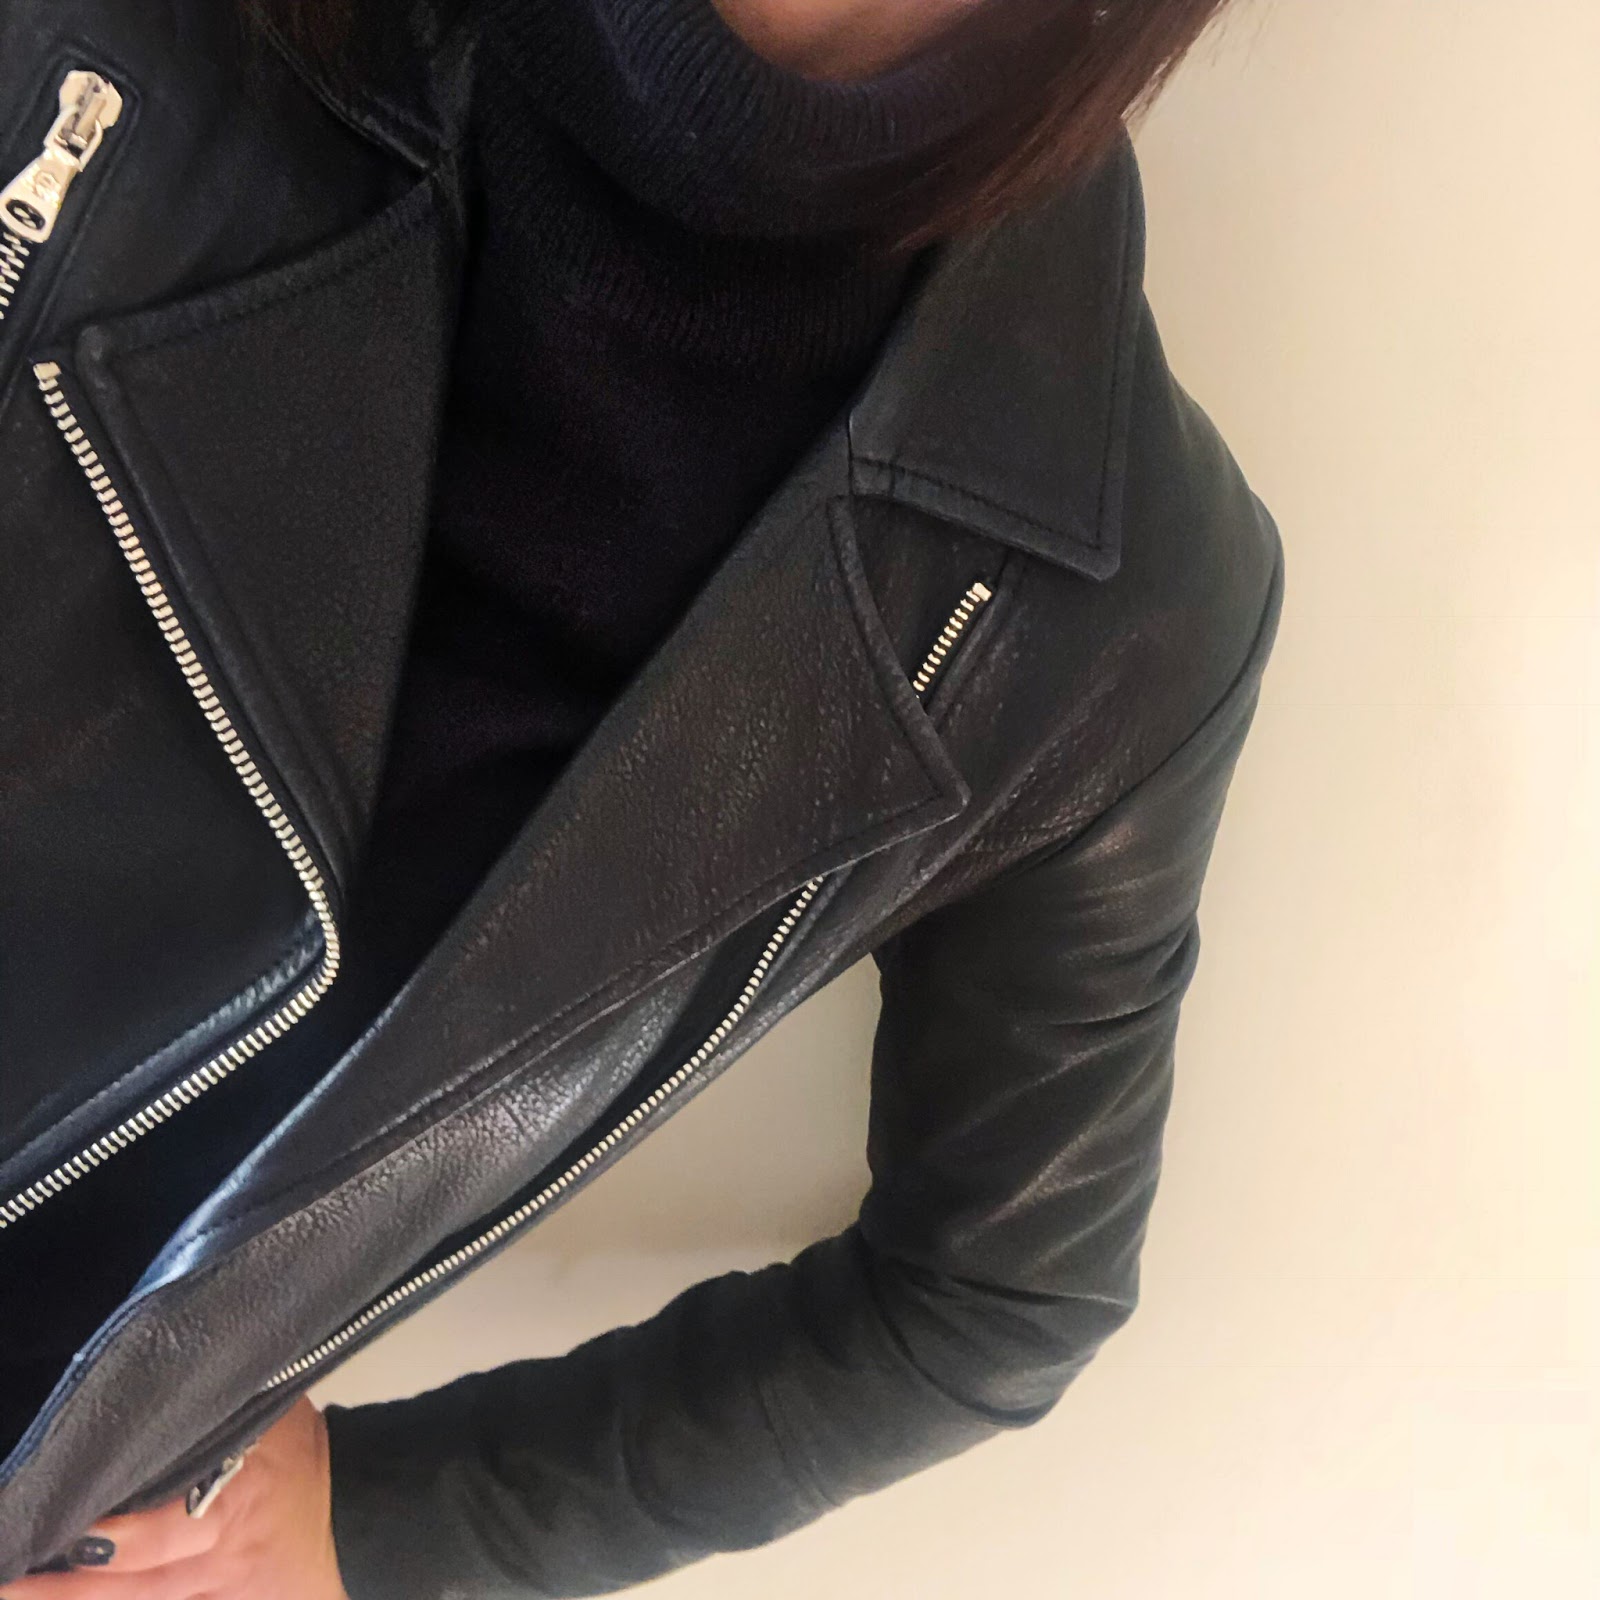 my midlife fashion, massimo dutti navy leather biker jacket, marks and spencer pure cashmere roll neck jumper, debenhams jenny packman metallic gold pleated maxi skirt, marks and spencer side zip stiletto heel ankle boots